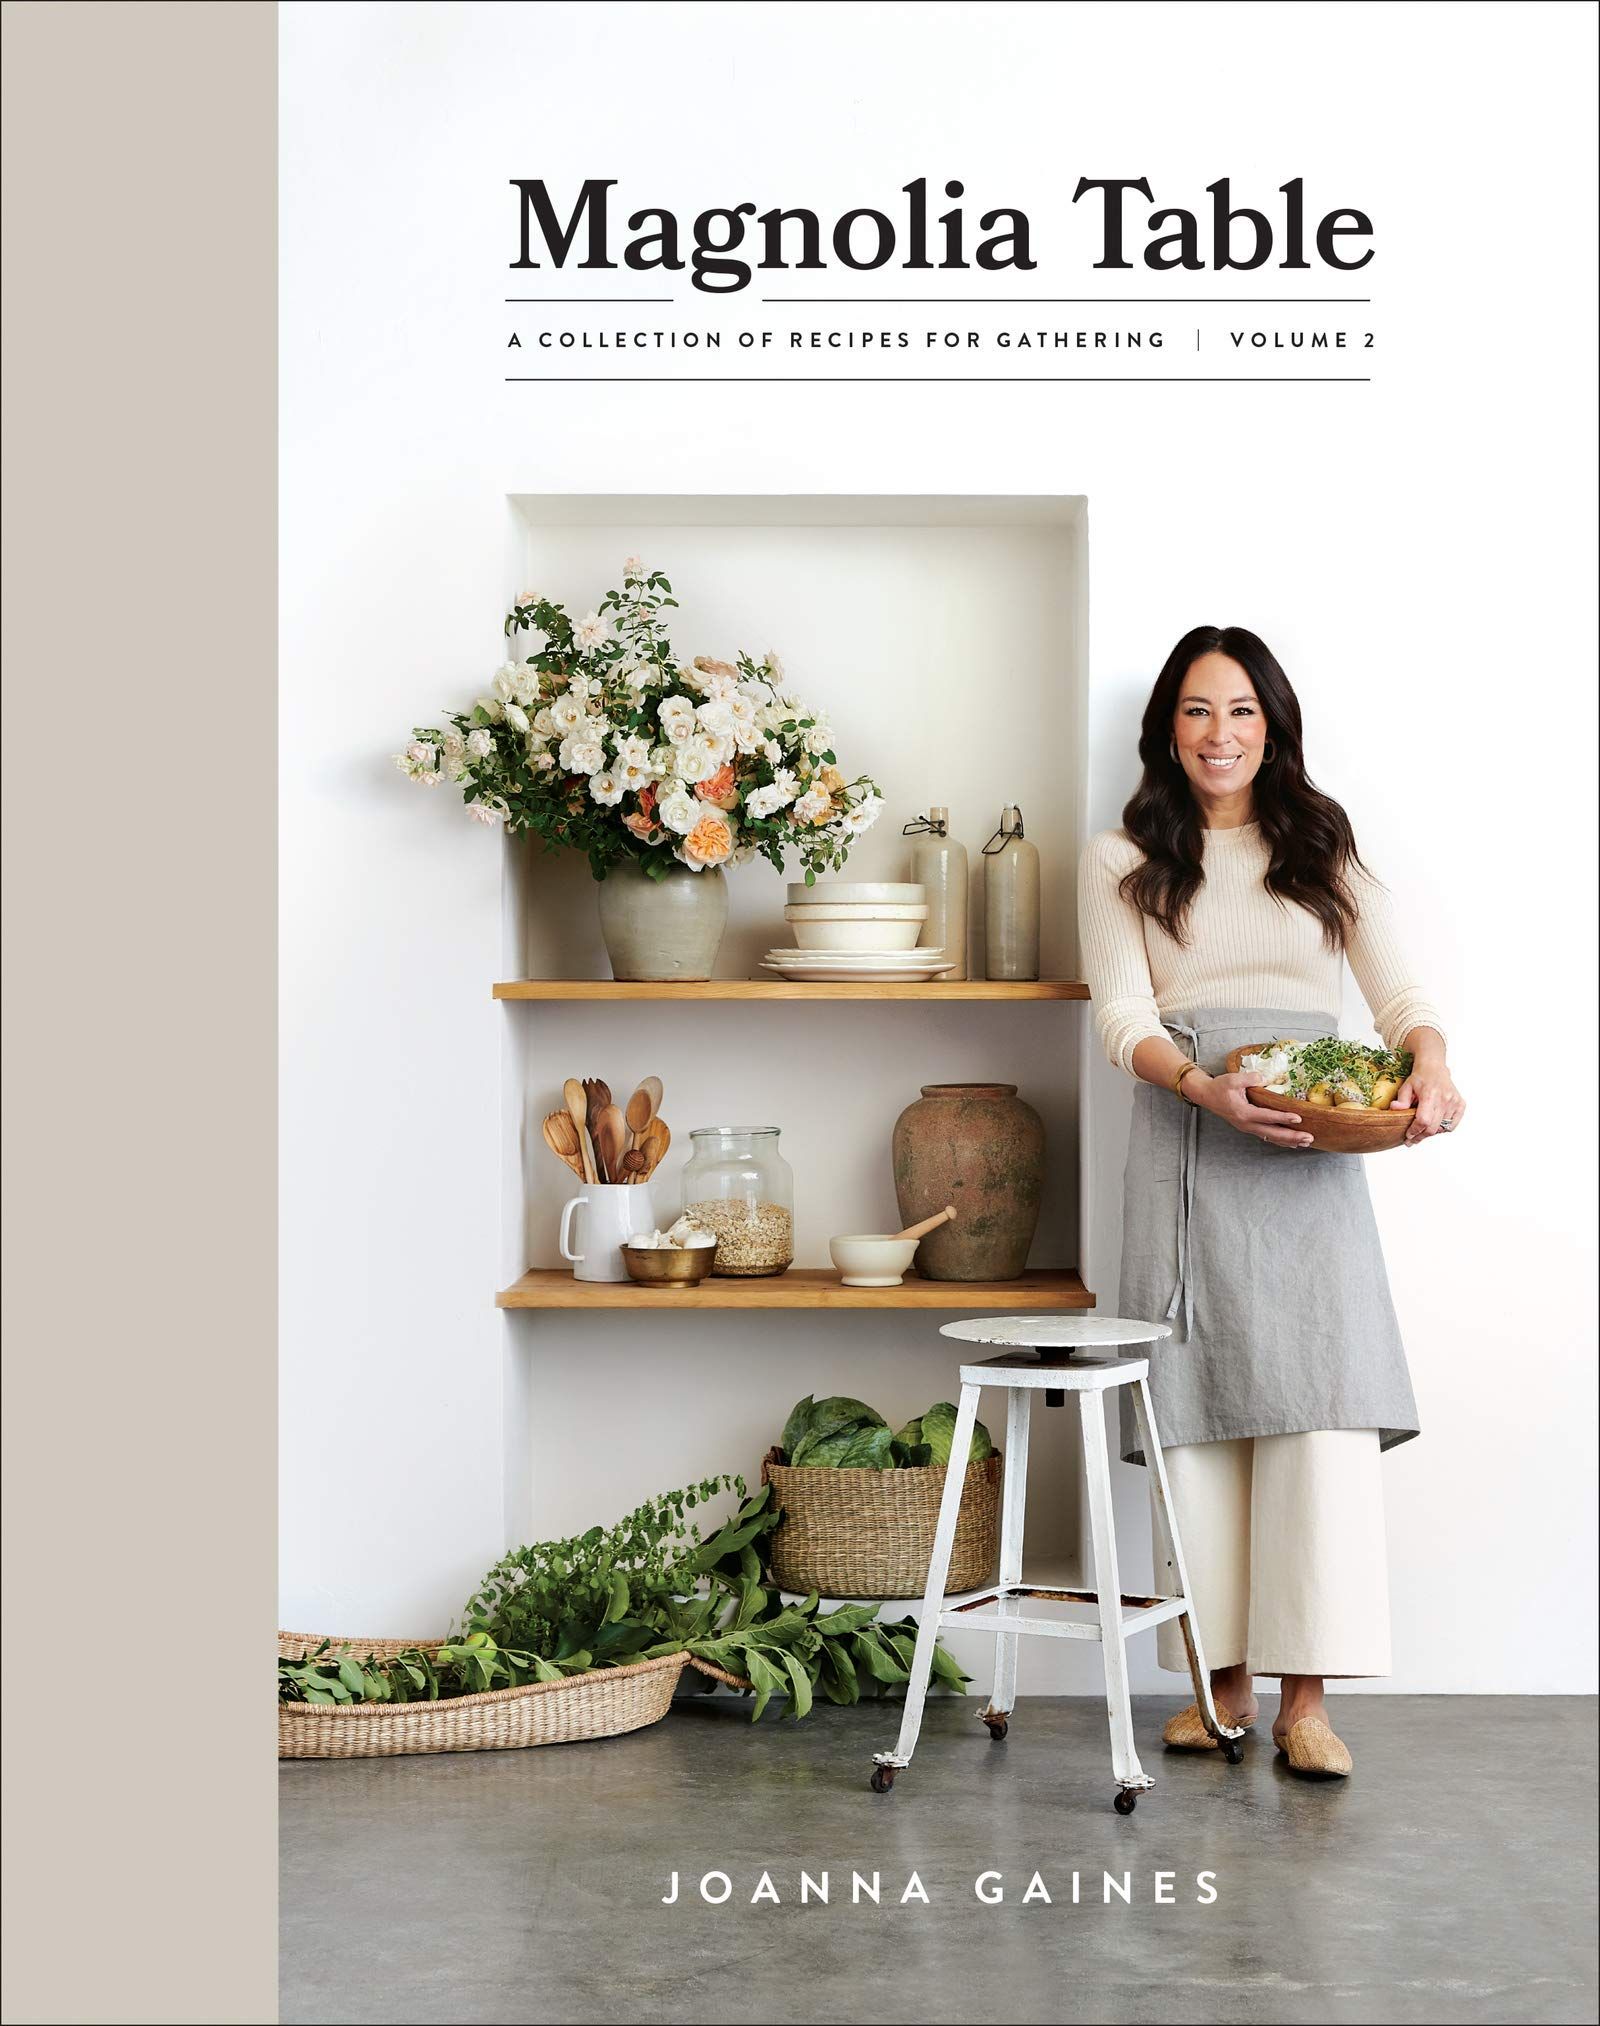 Magnolia Table, Volume 2 A Collection of Recipes for Gathering Hardcover by Joanna Gaines.